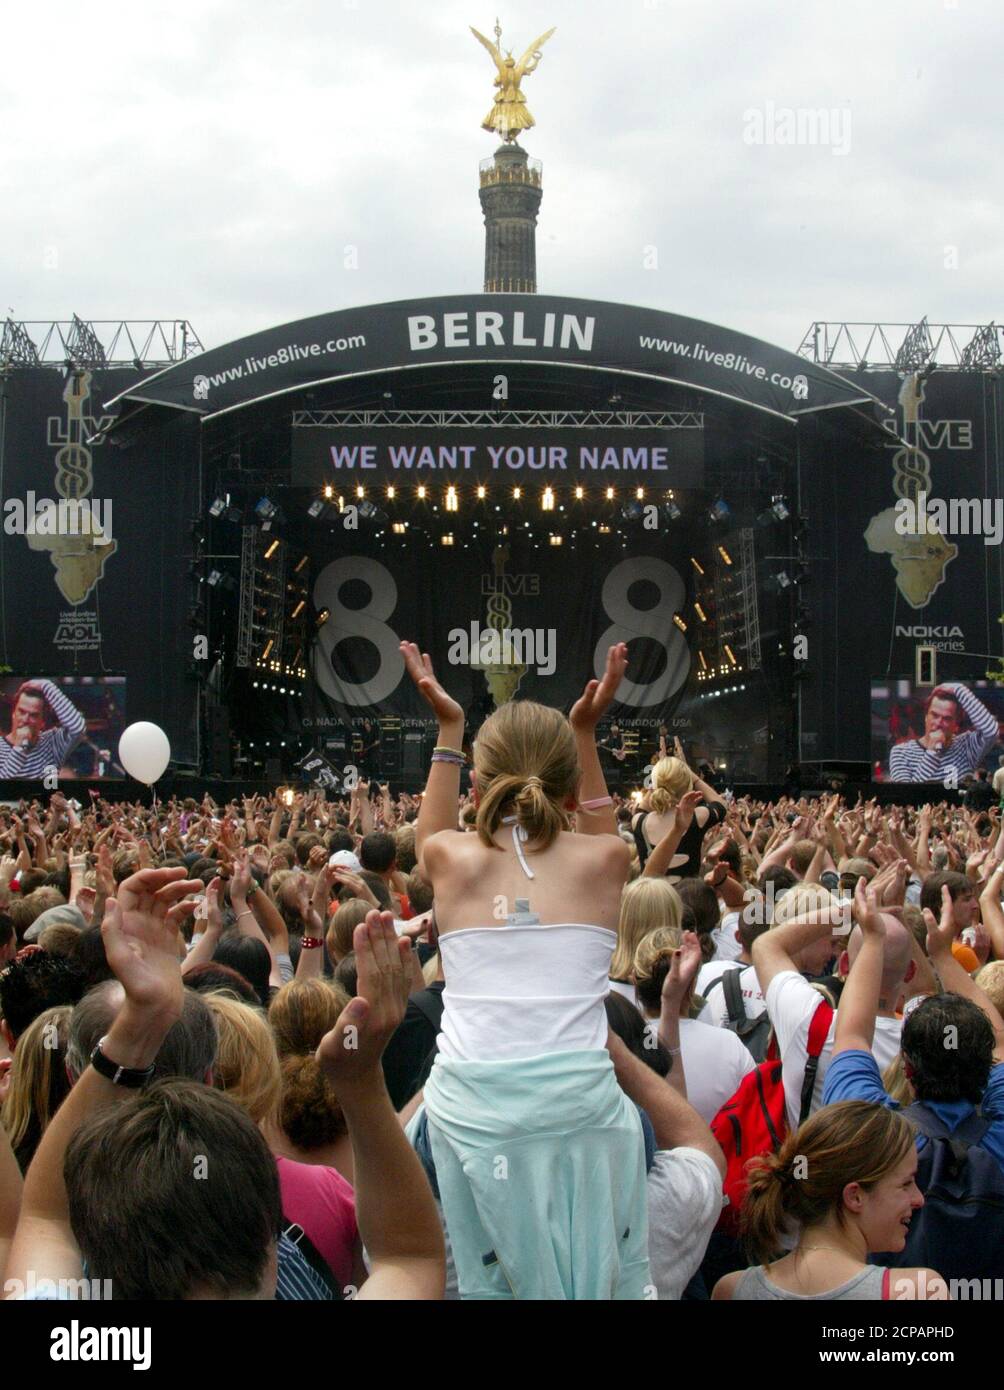 German band 'Die Toten Hosen' performs during the Live 8 concert in front  of the Victory column in Berlin. The crowd cheers as German band 'Die Toten  Hosen' performs during the Live